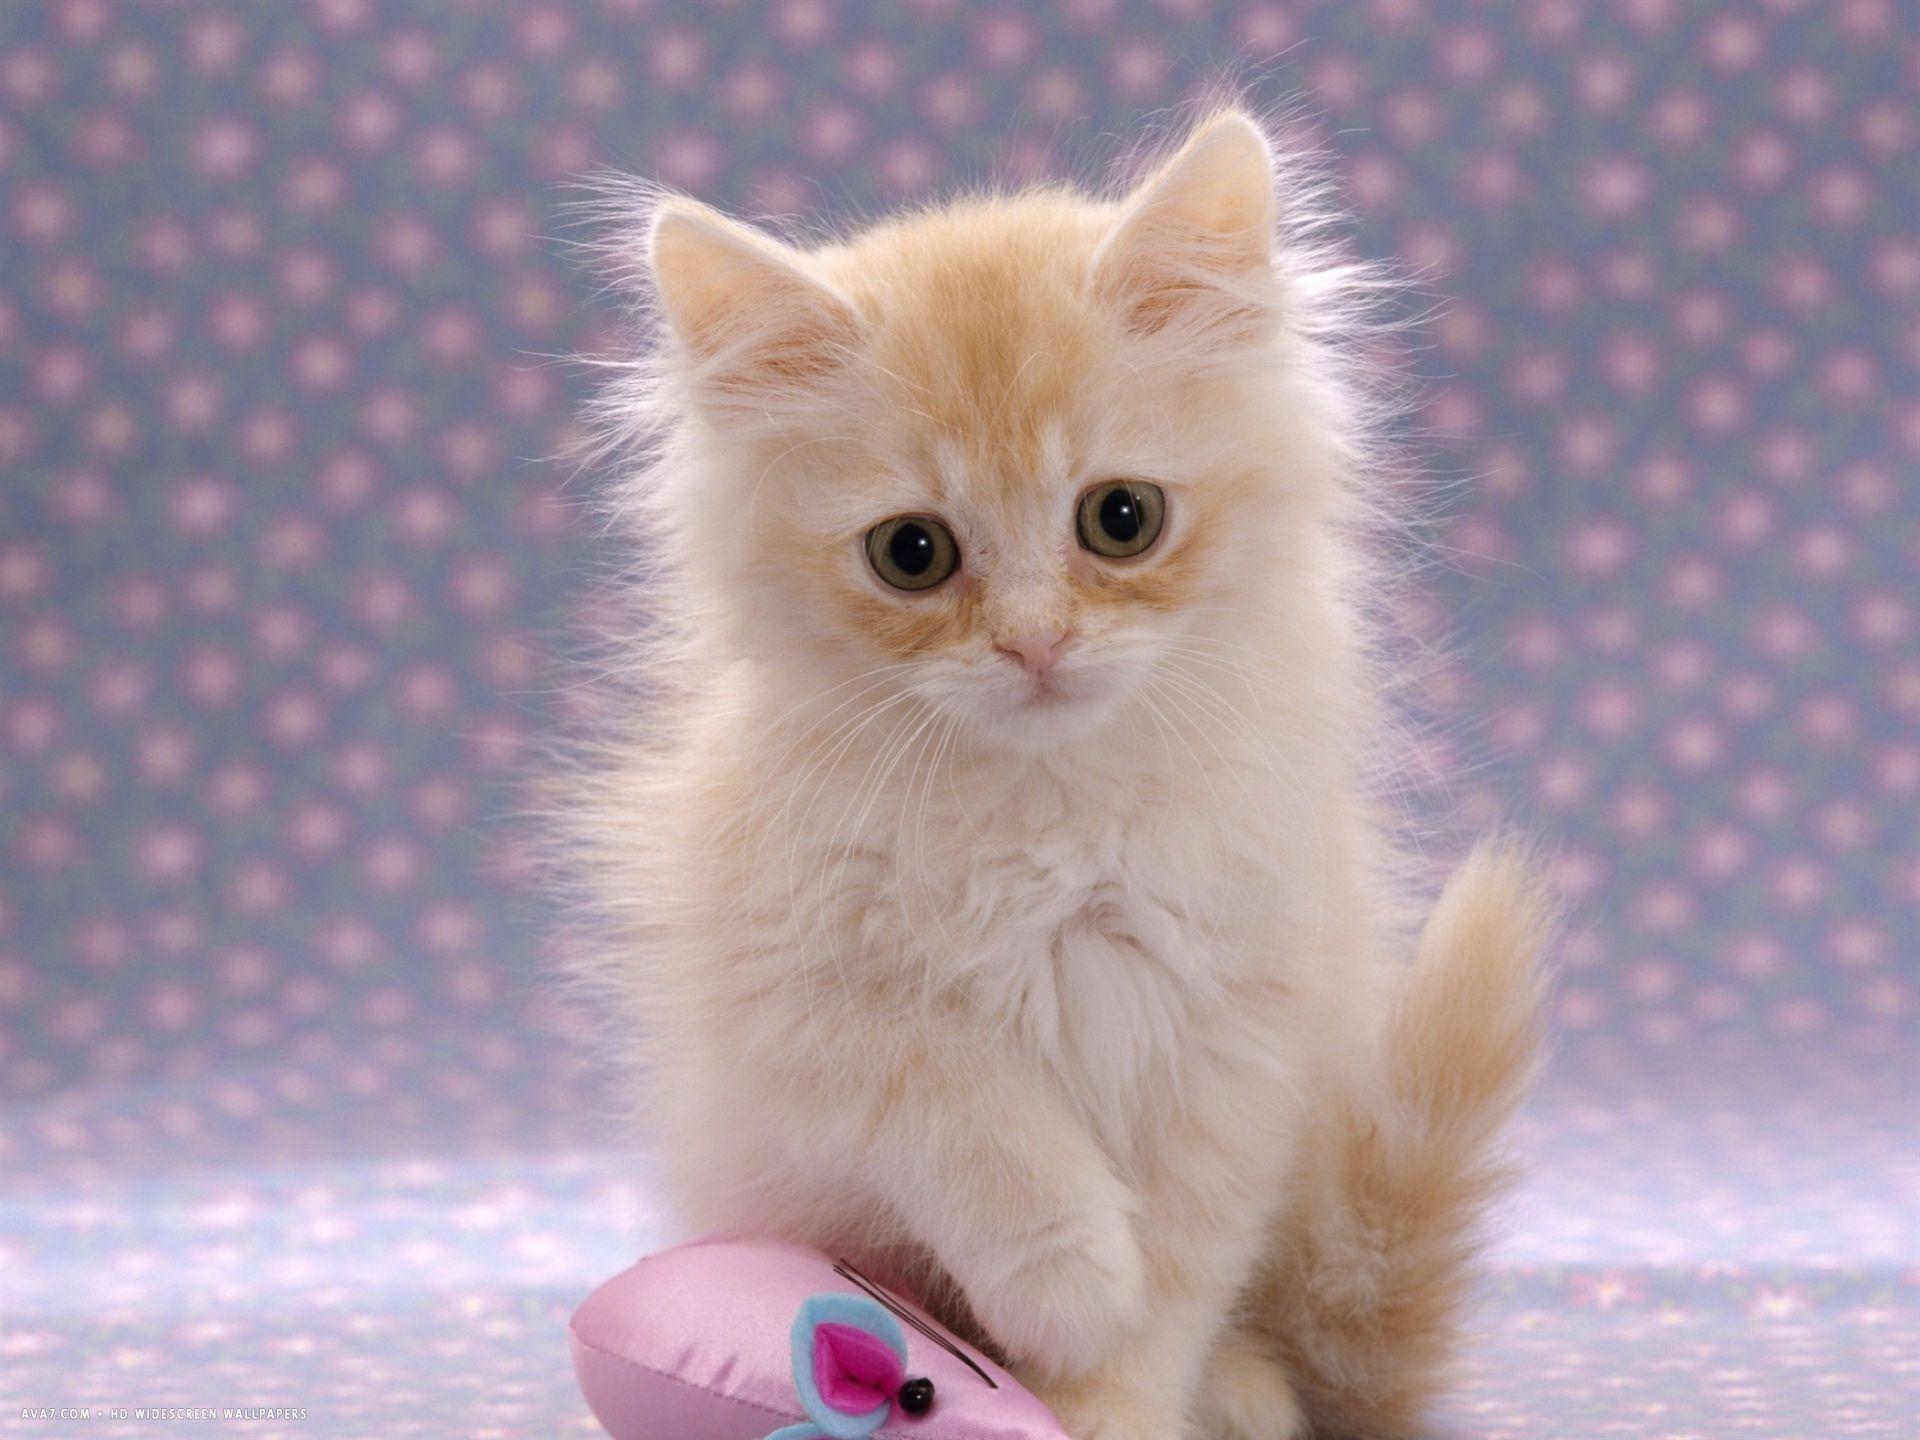 week fluffy cream kitten with sad expression. domestic cat HD